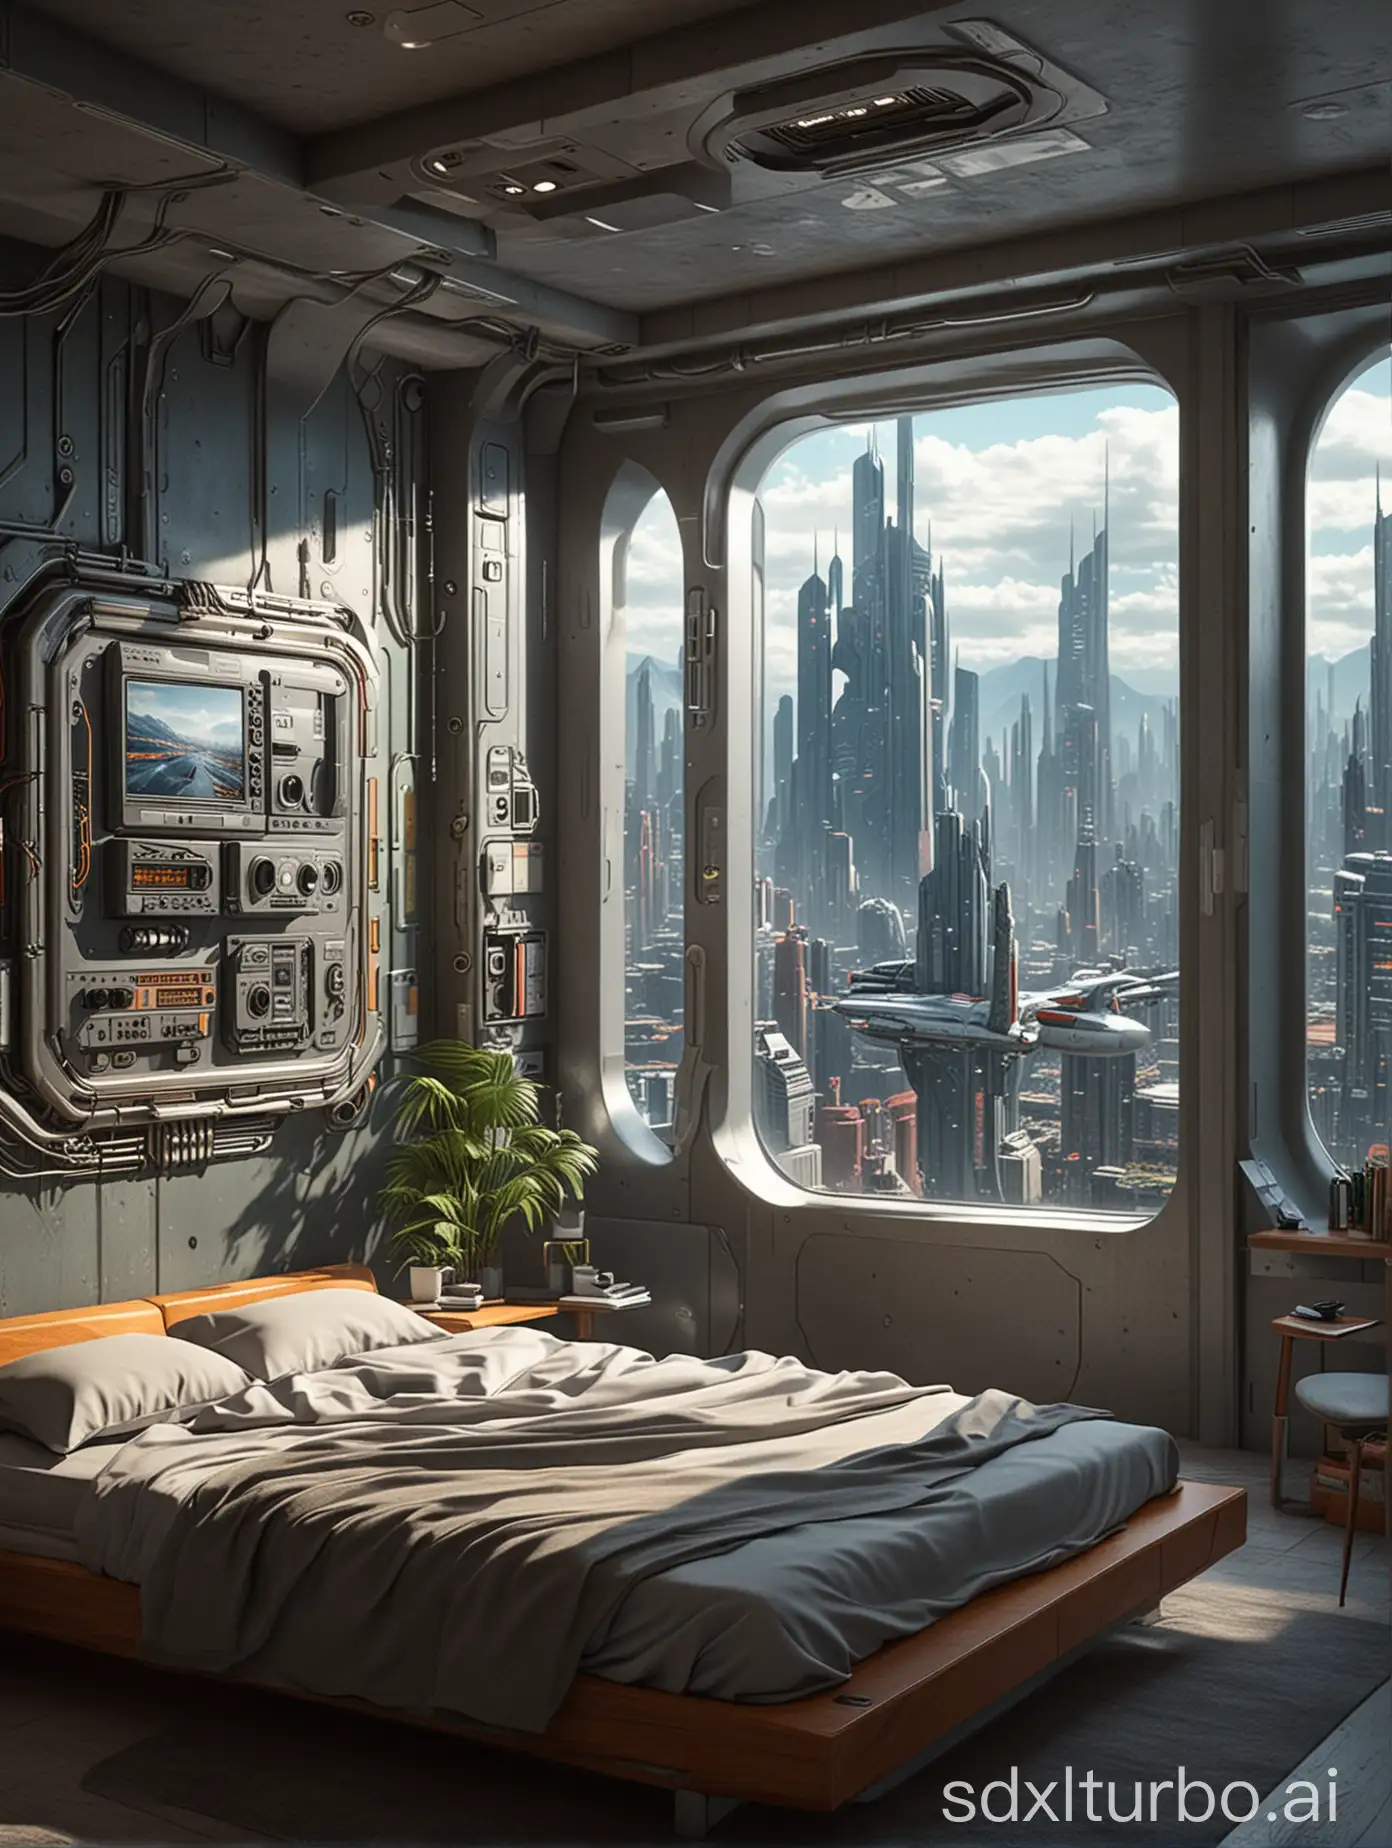 In the future, the sci-fi city bedroom and the scenery I can see